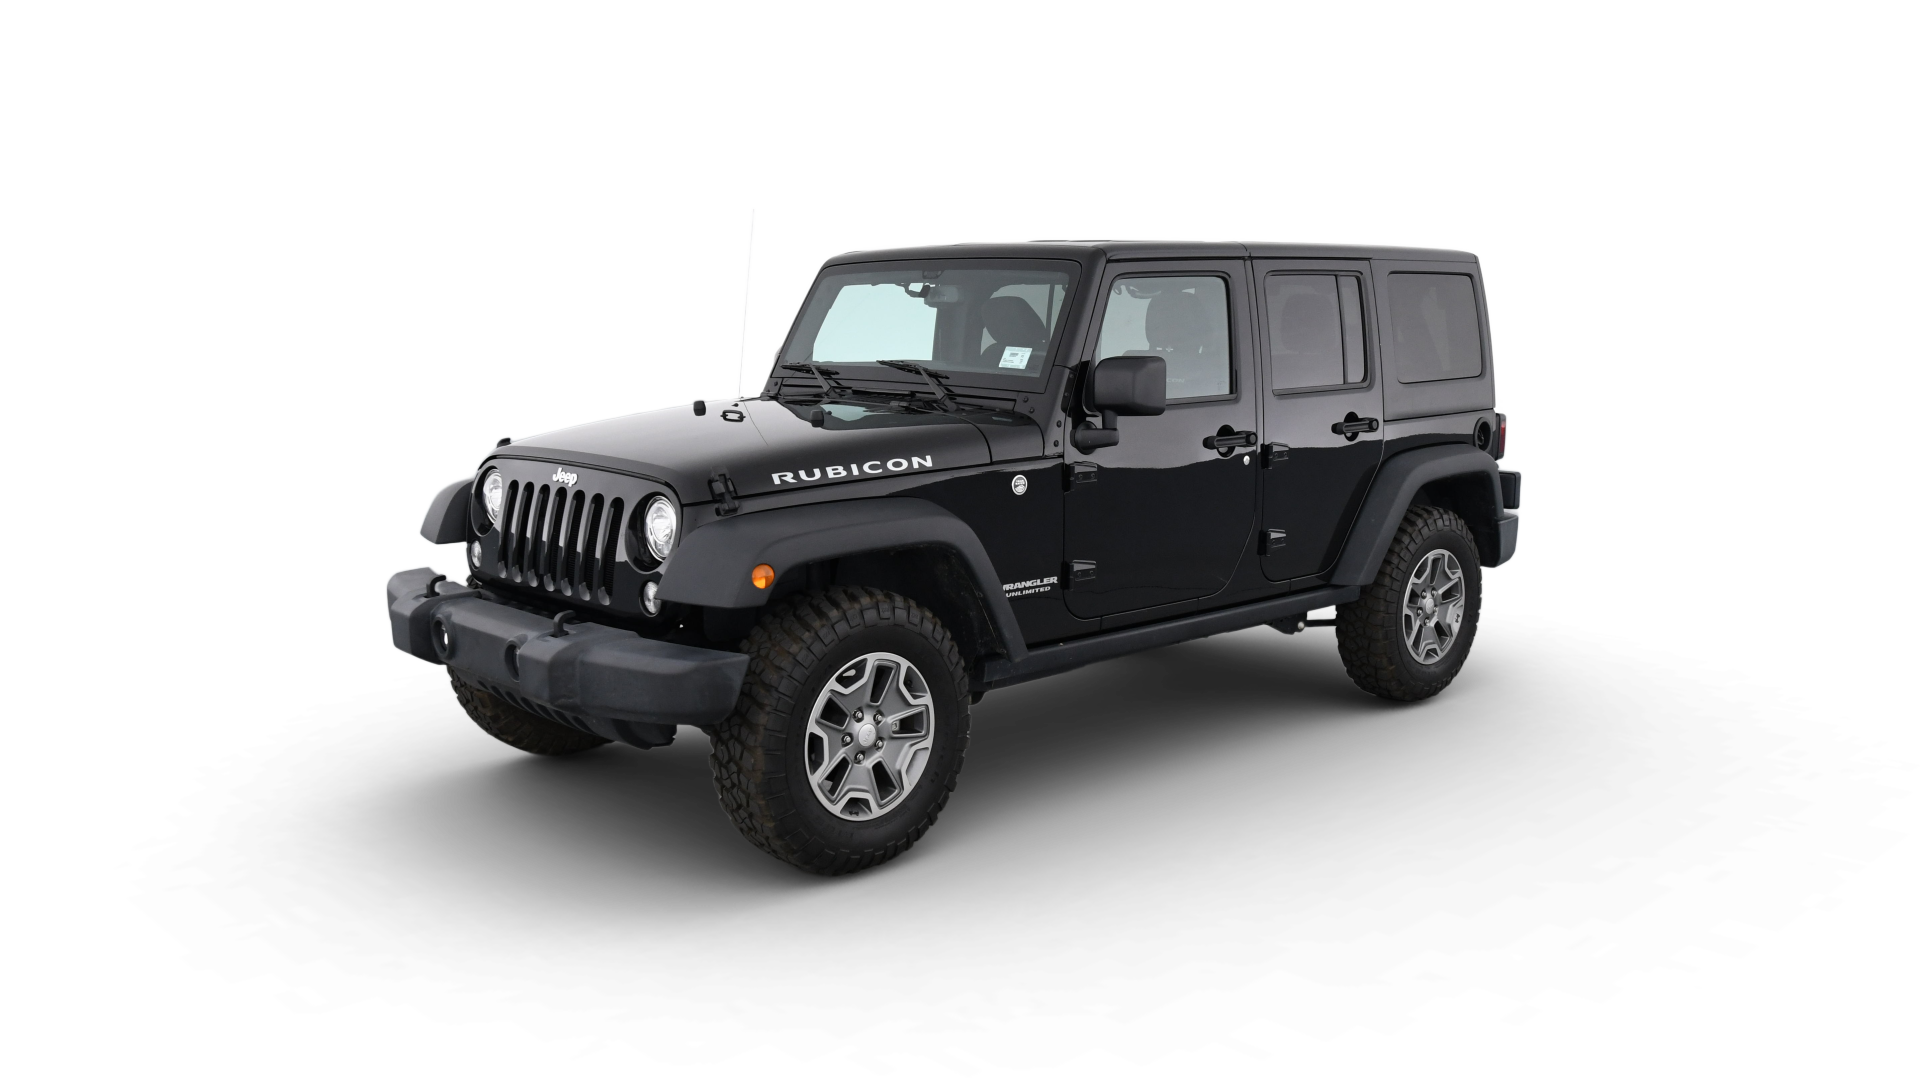 Used Jeep Rubicon For Sale Online | Carvana